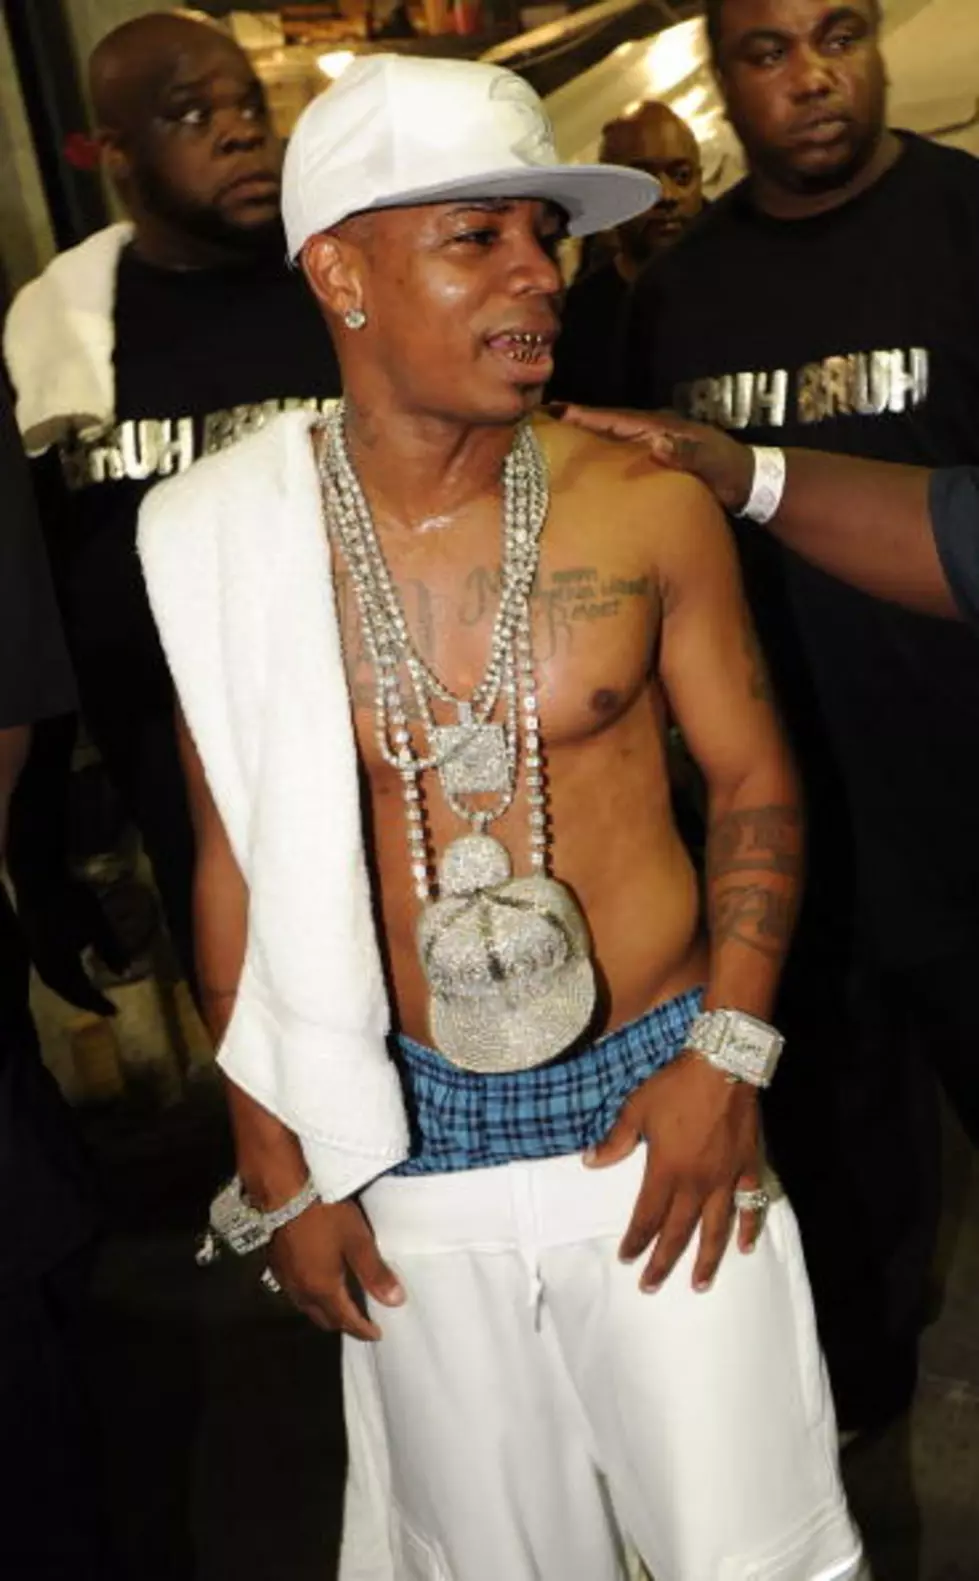 Plies Named In Lawsuit For Stealing Mixtape Track